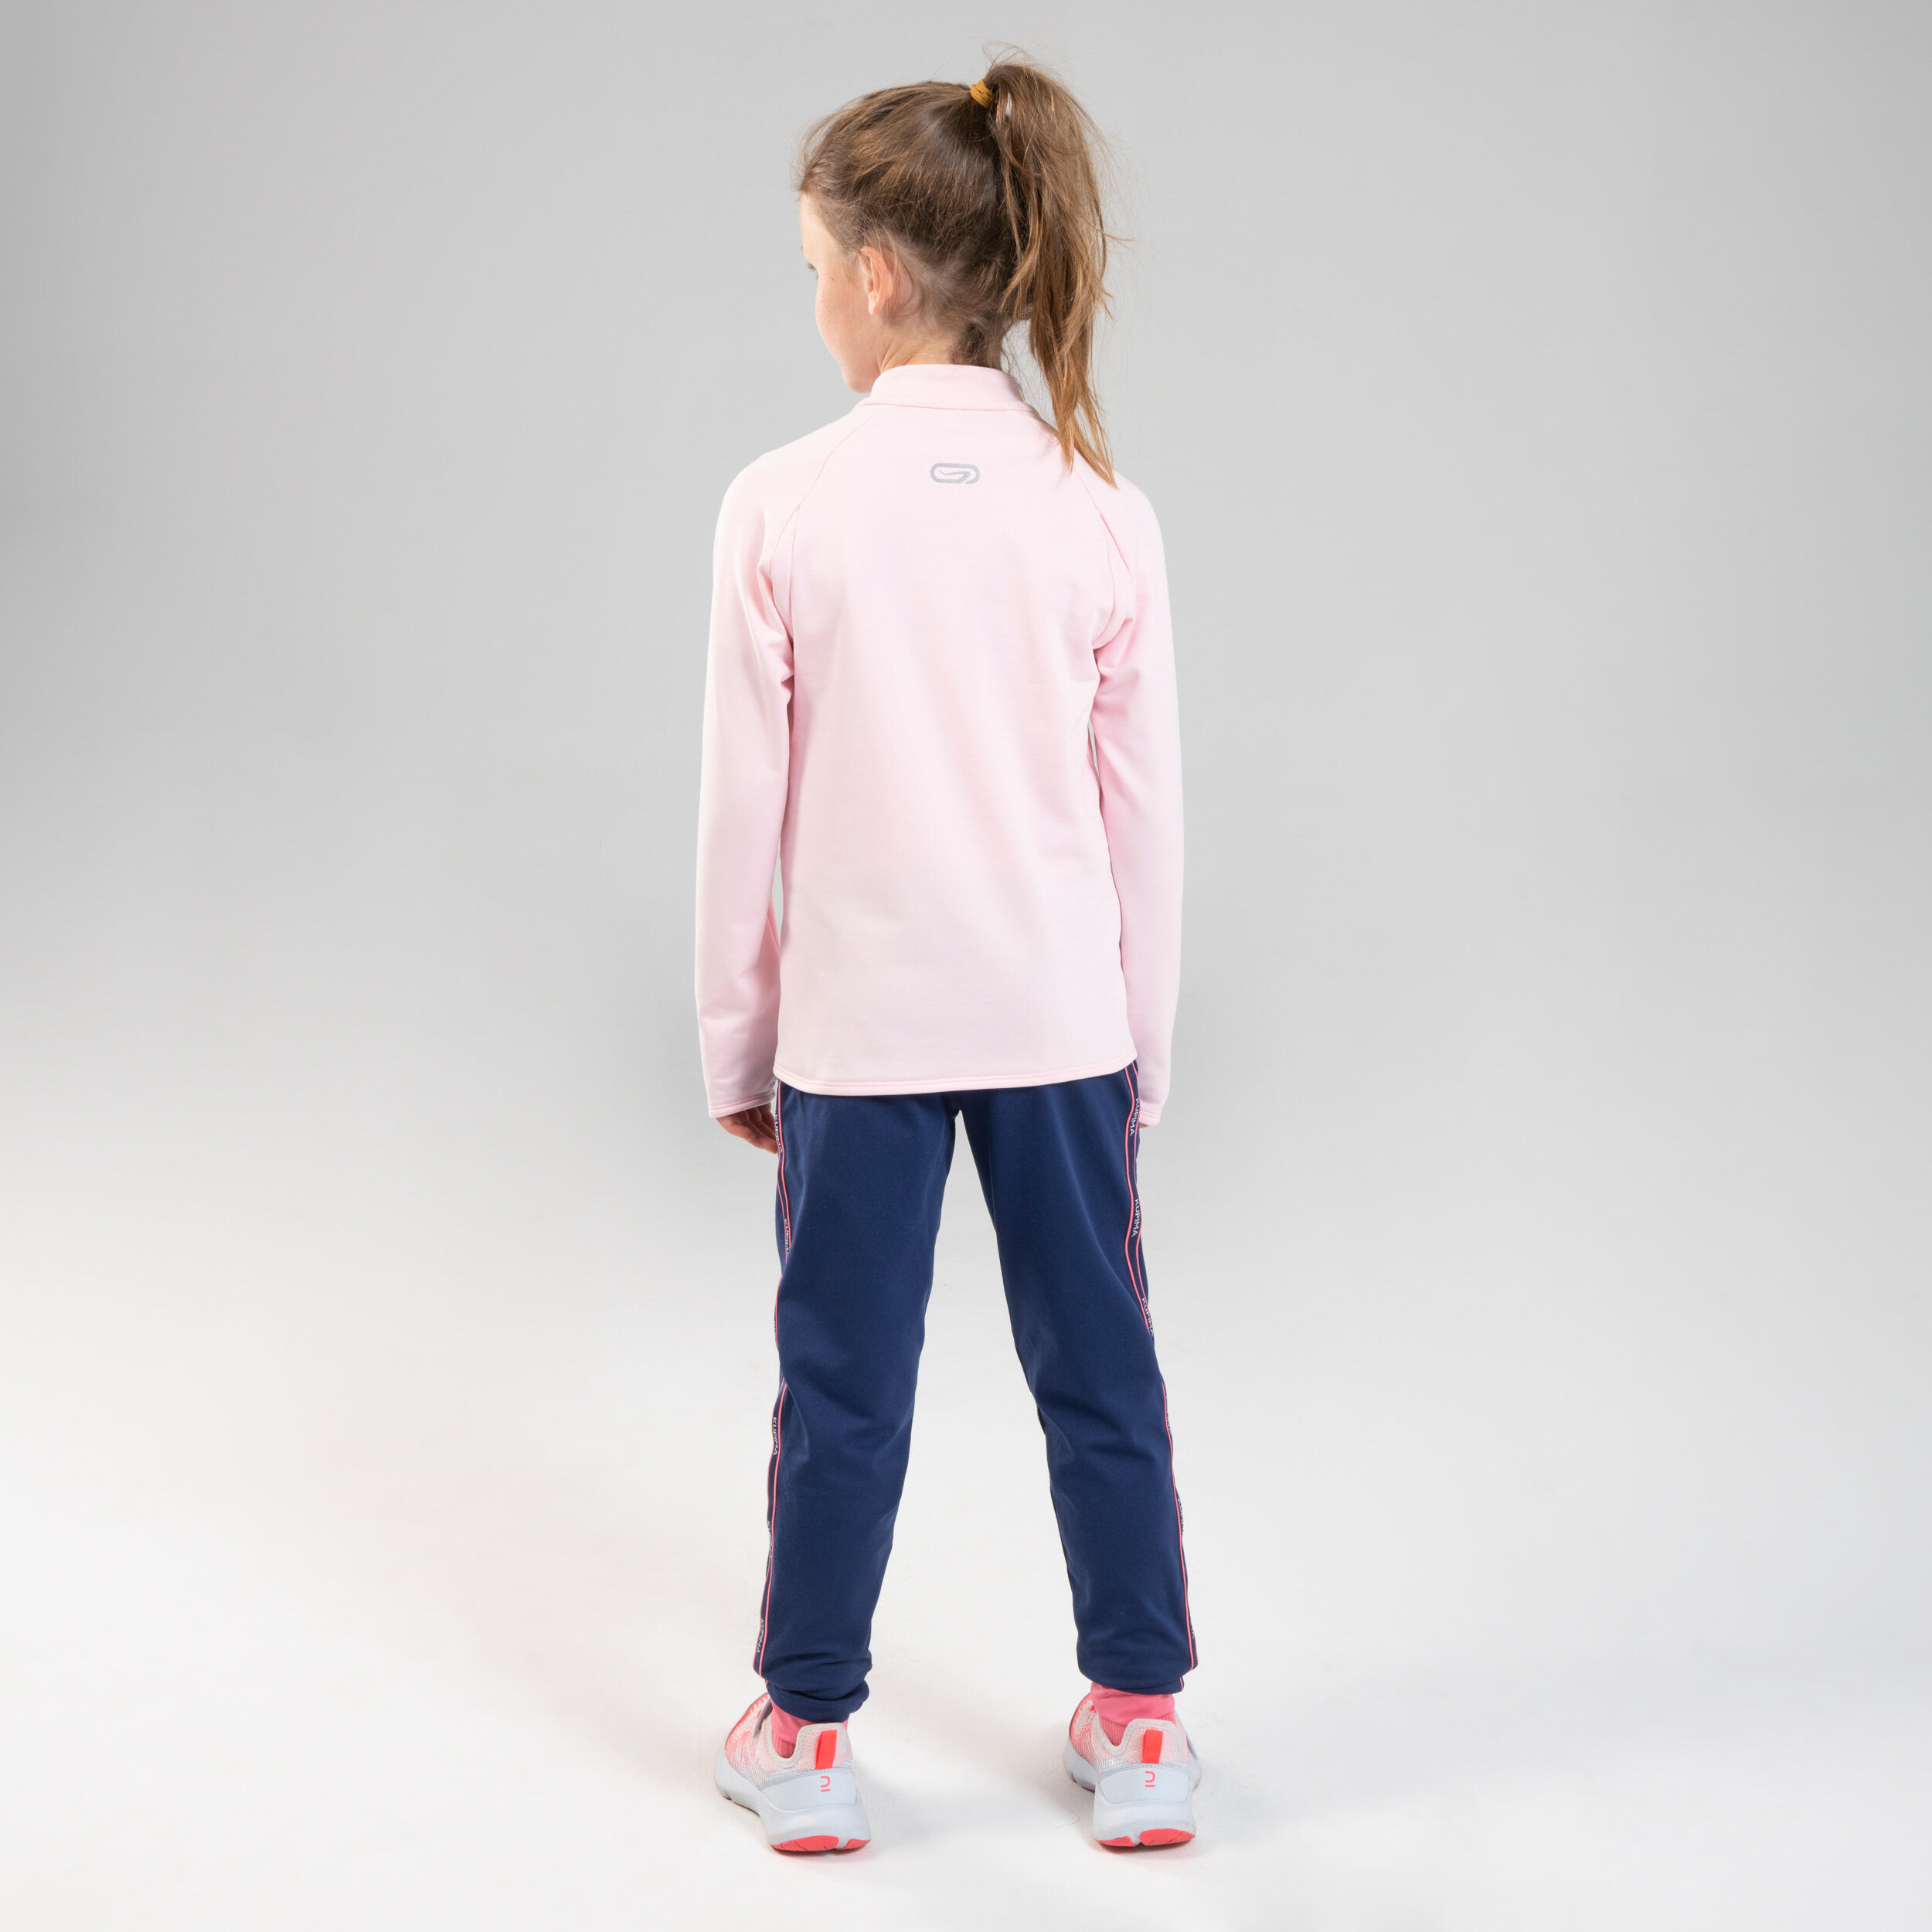 Kids' Warm Breathable Synthetic Jogging Bottoms S500 - Navy/Pink 8/11